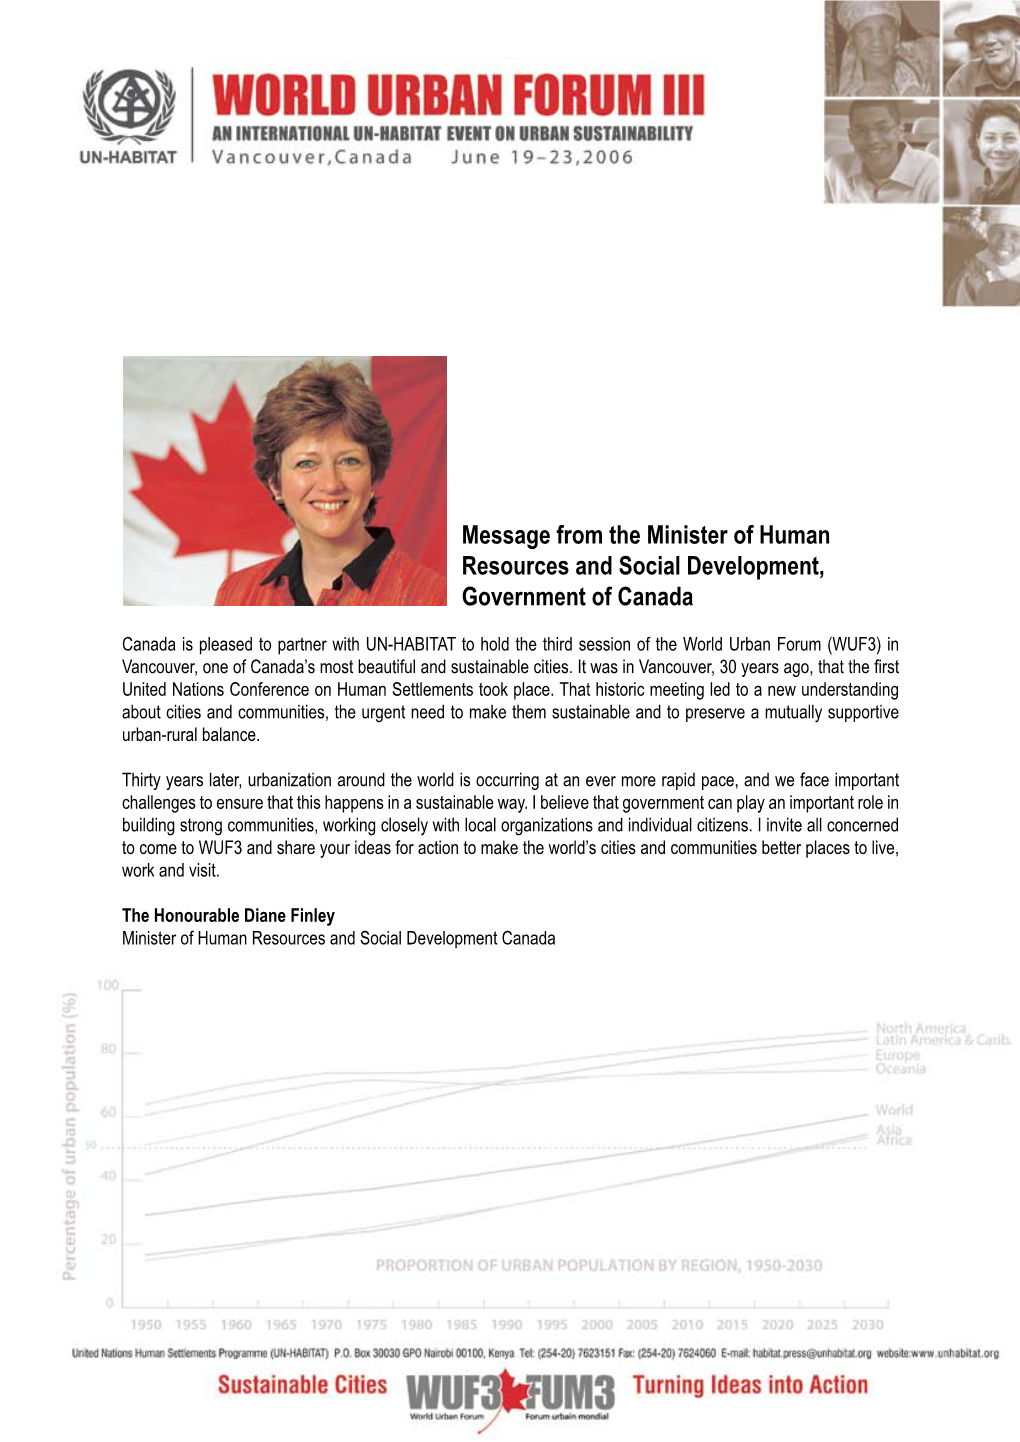 Message from the Minister of Human Resources and Social Development, Government of Canada